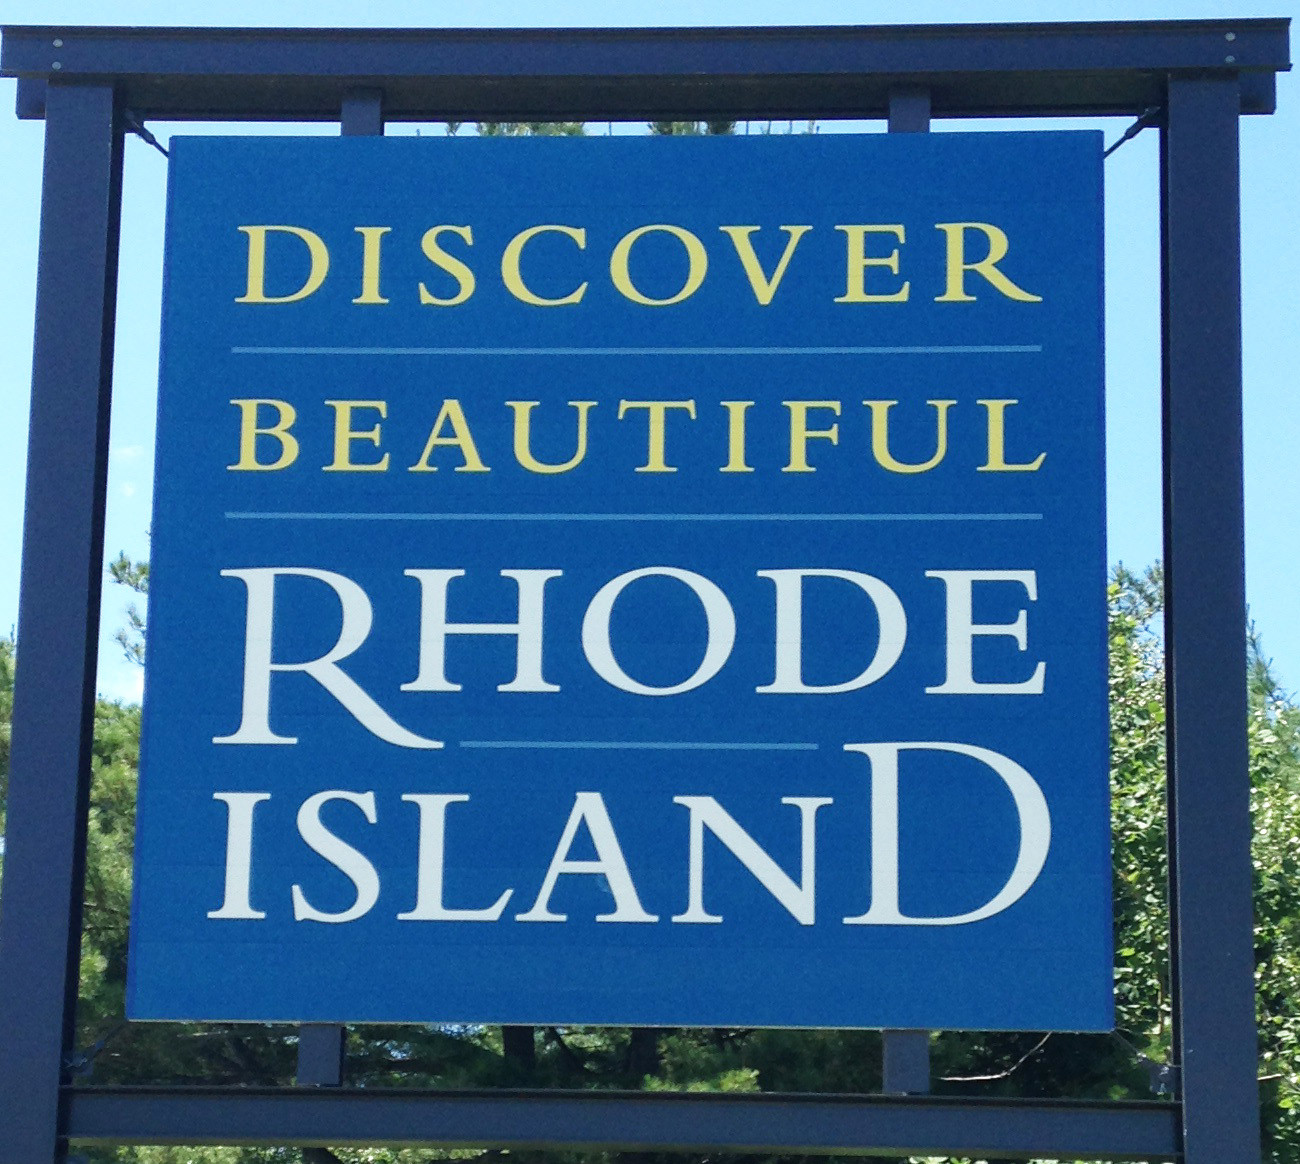 Rhode Island Poised To Receive New Federal Award To Promote Health Innovation - Convergenceri